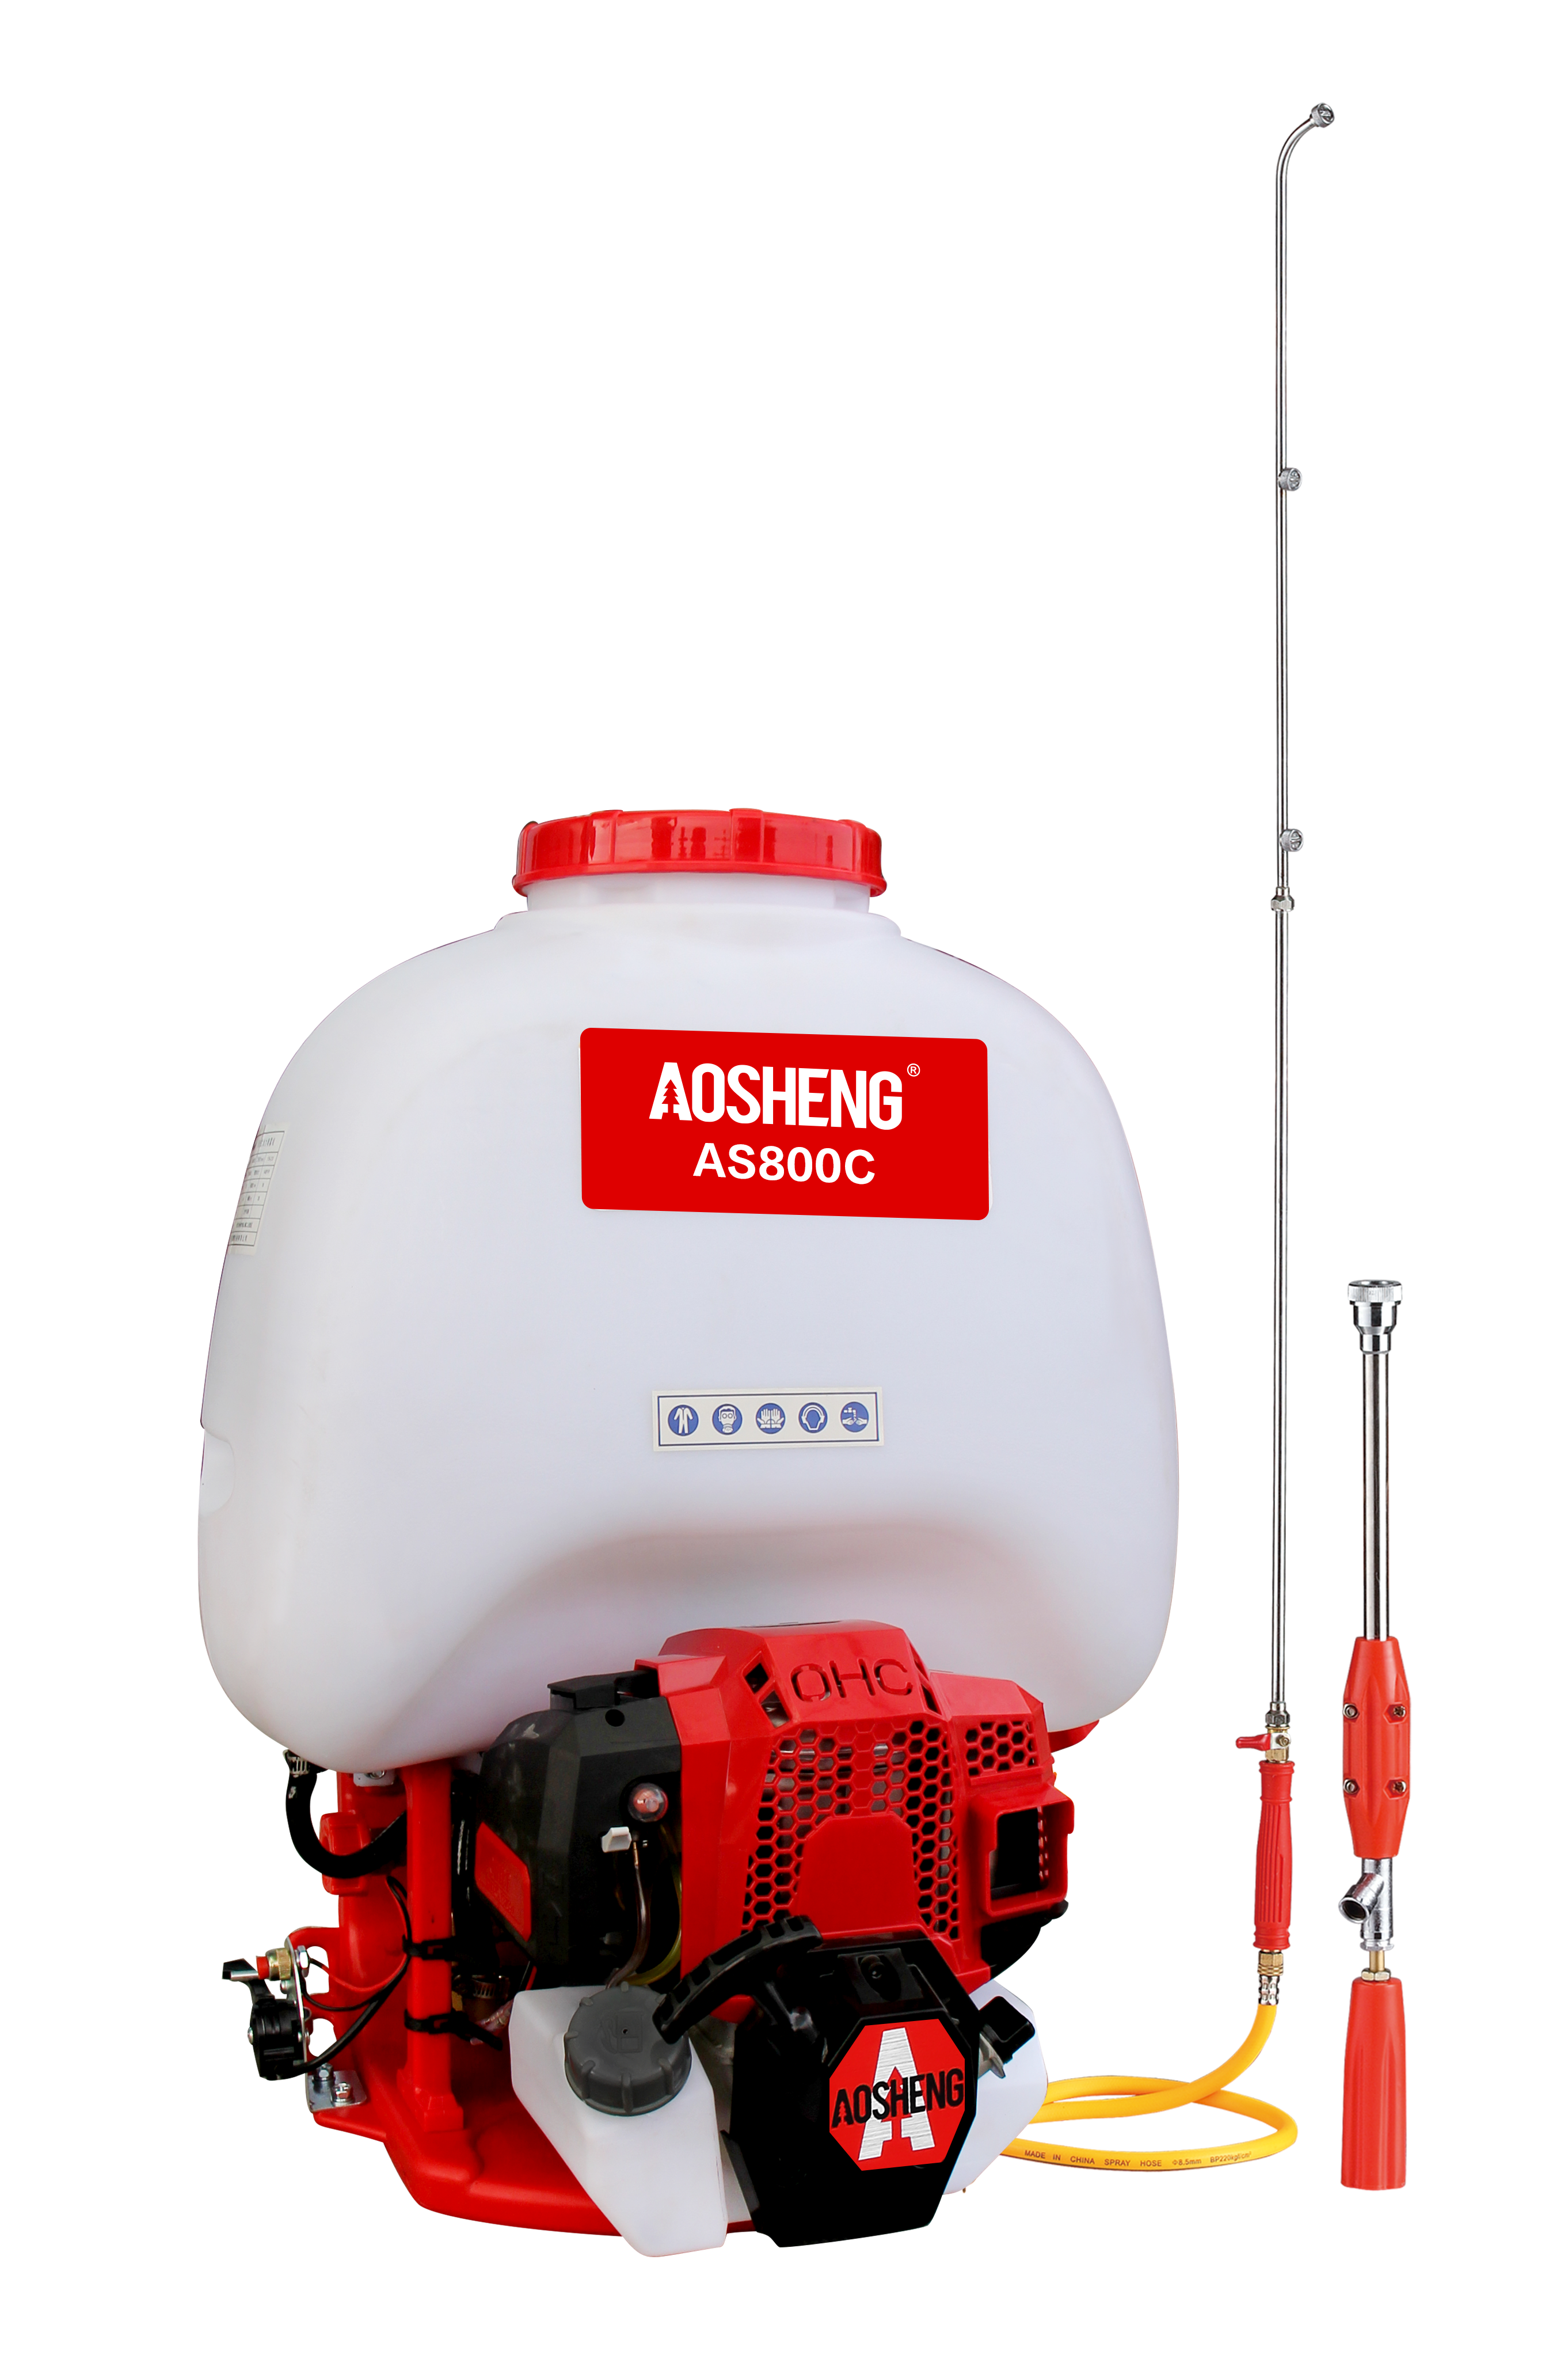 Gasoline power sprayers come in a variety of sizes and designs